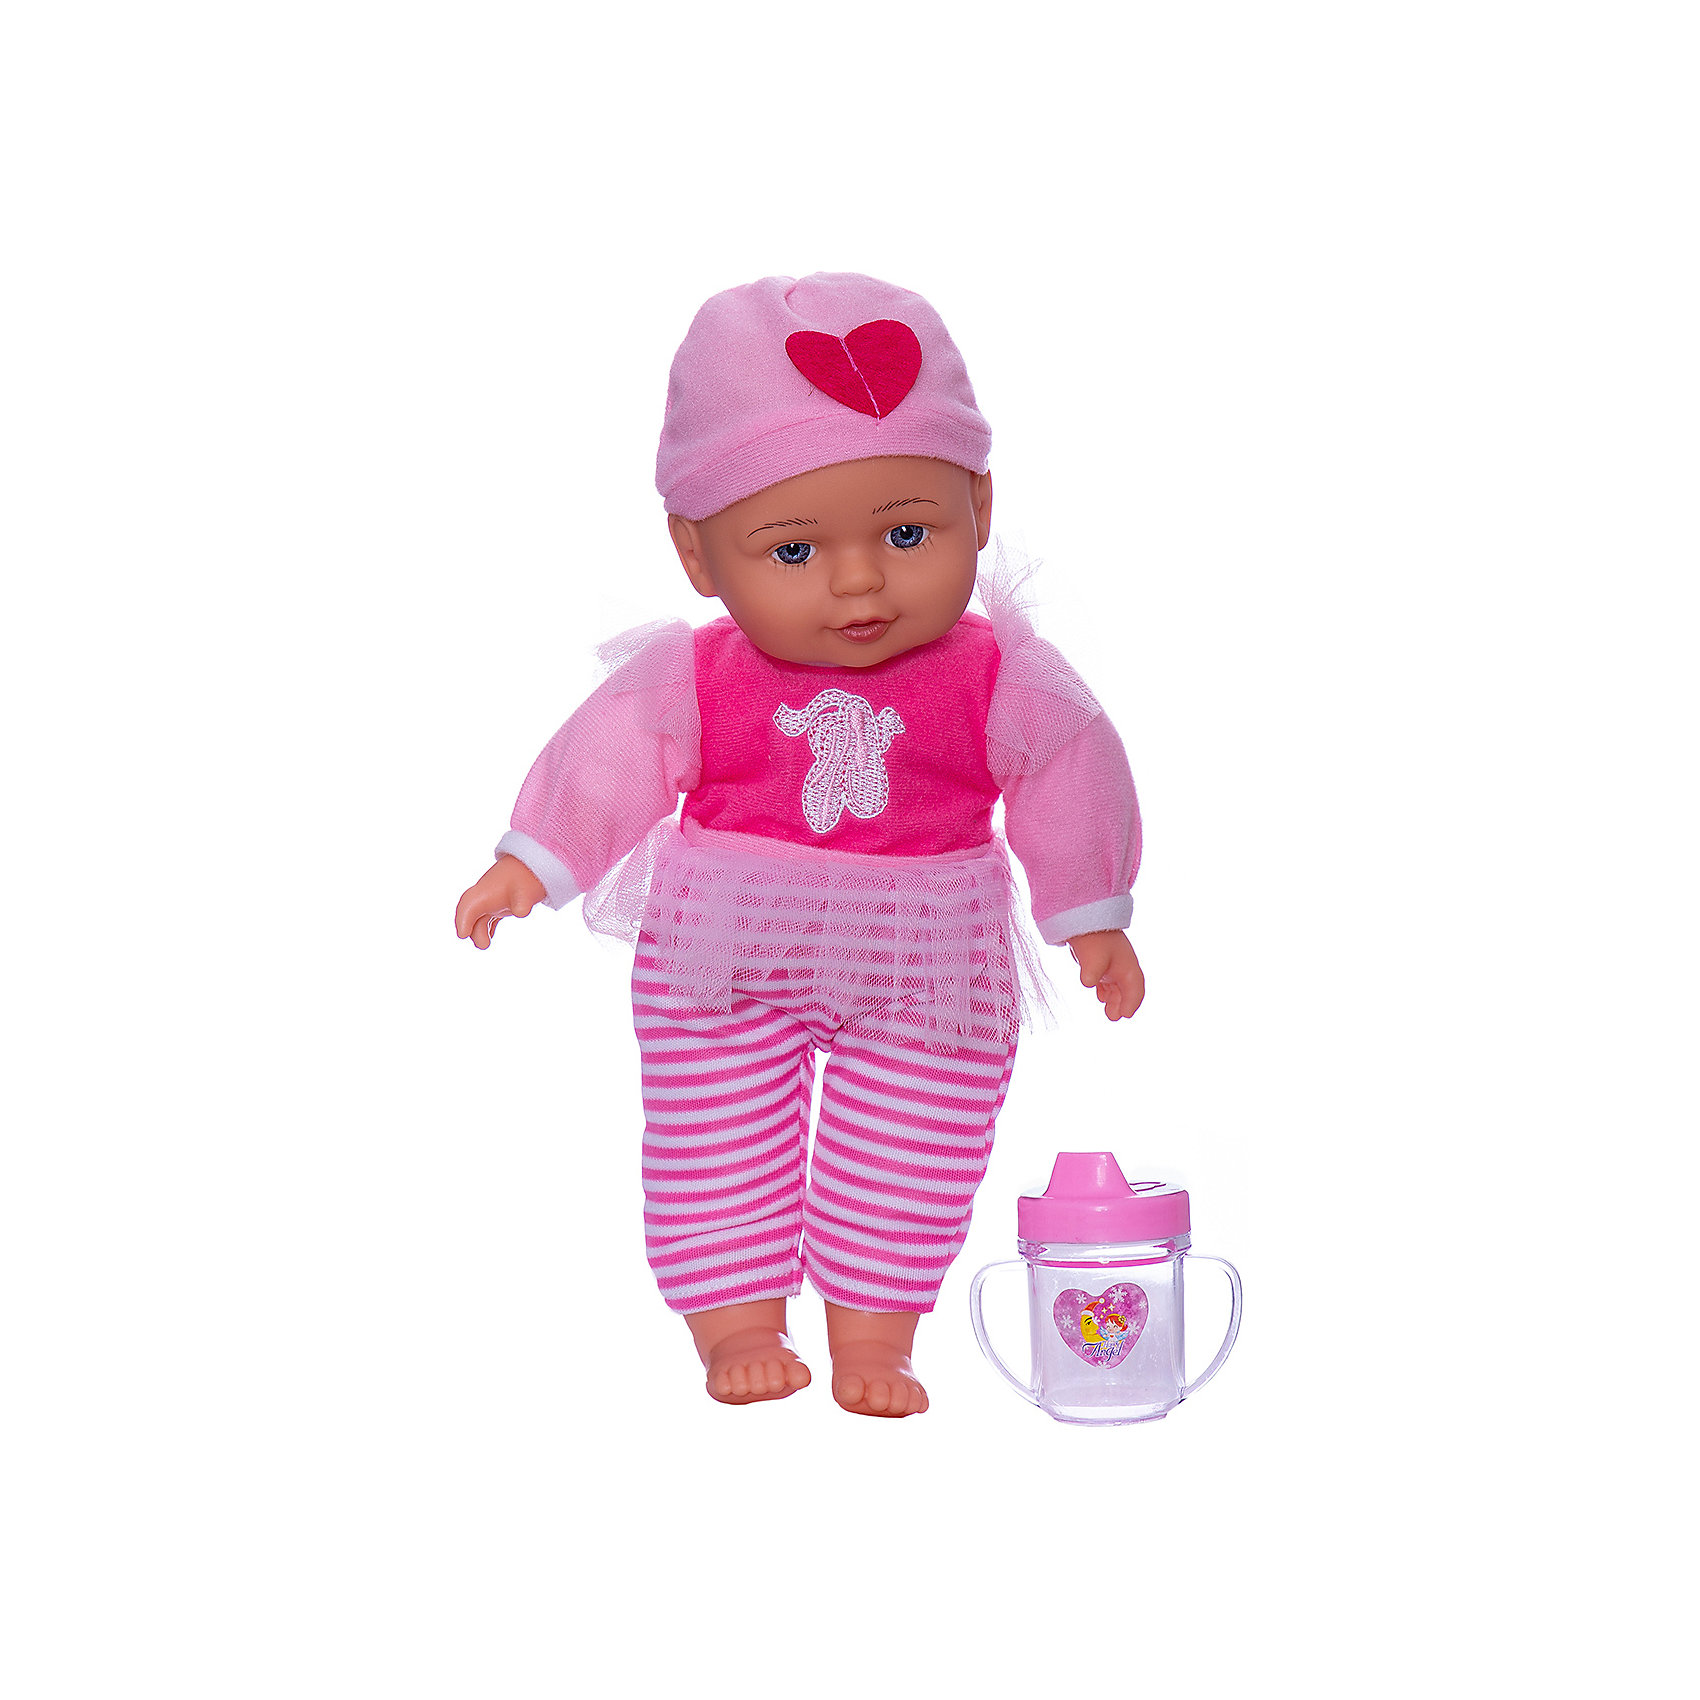 Boutique 33. Кукла ABTOYS Baby Boutique, 33 см, pt-00956. Пупс ABTOYS Baby Boutique, 25 см, pt-01003.